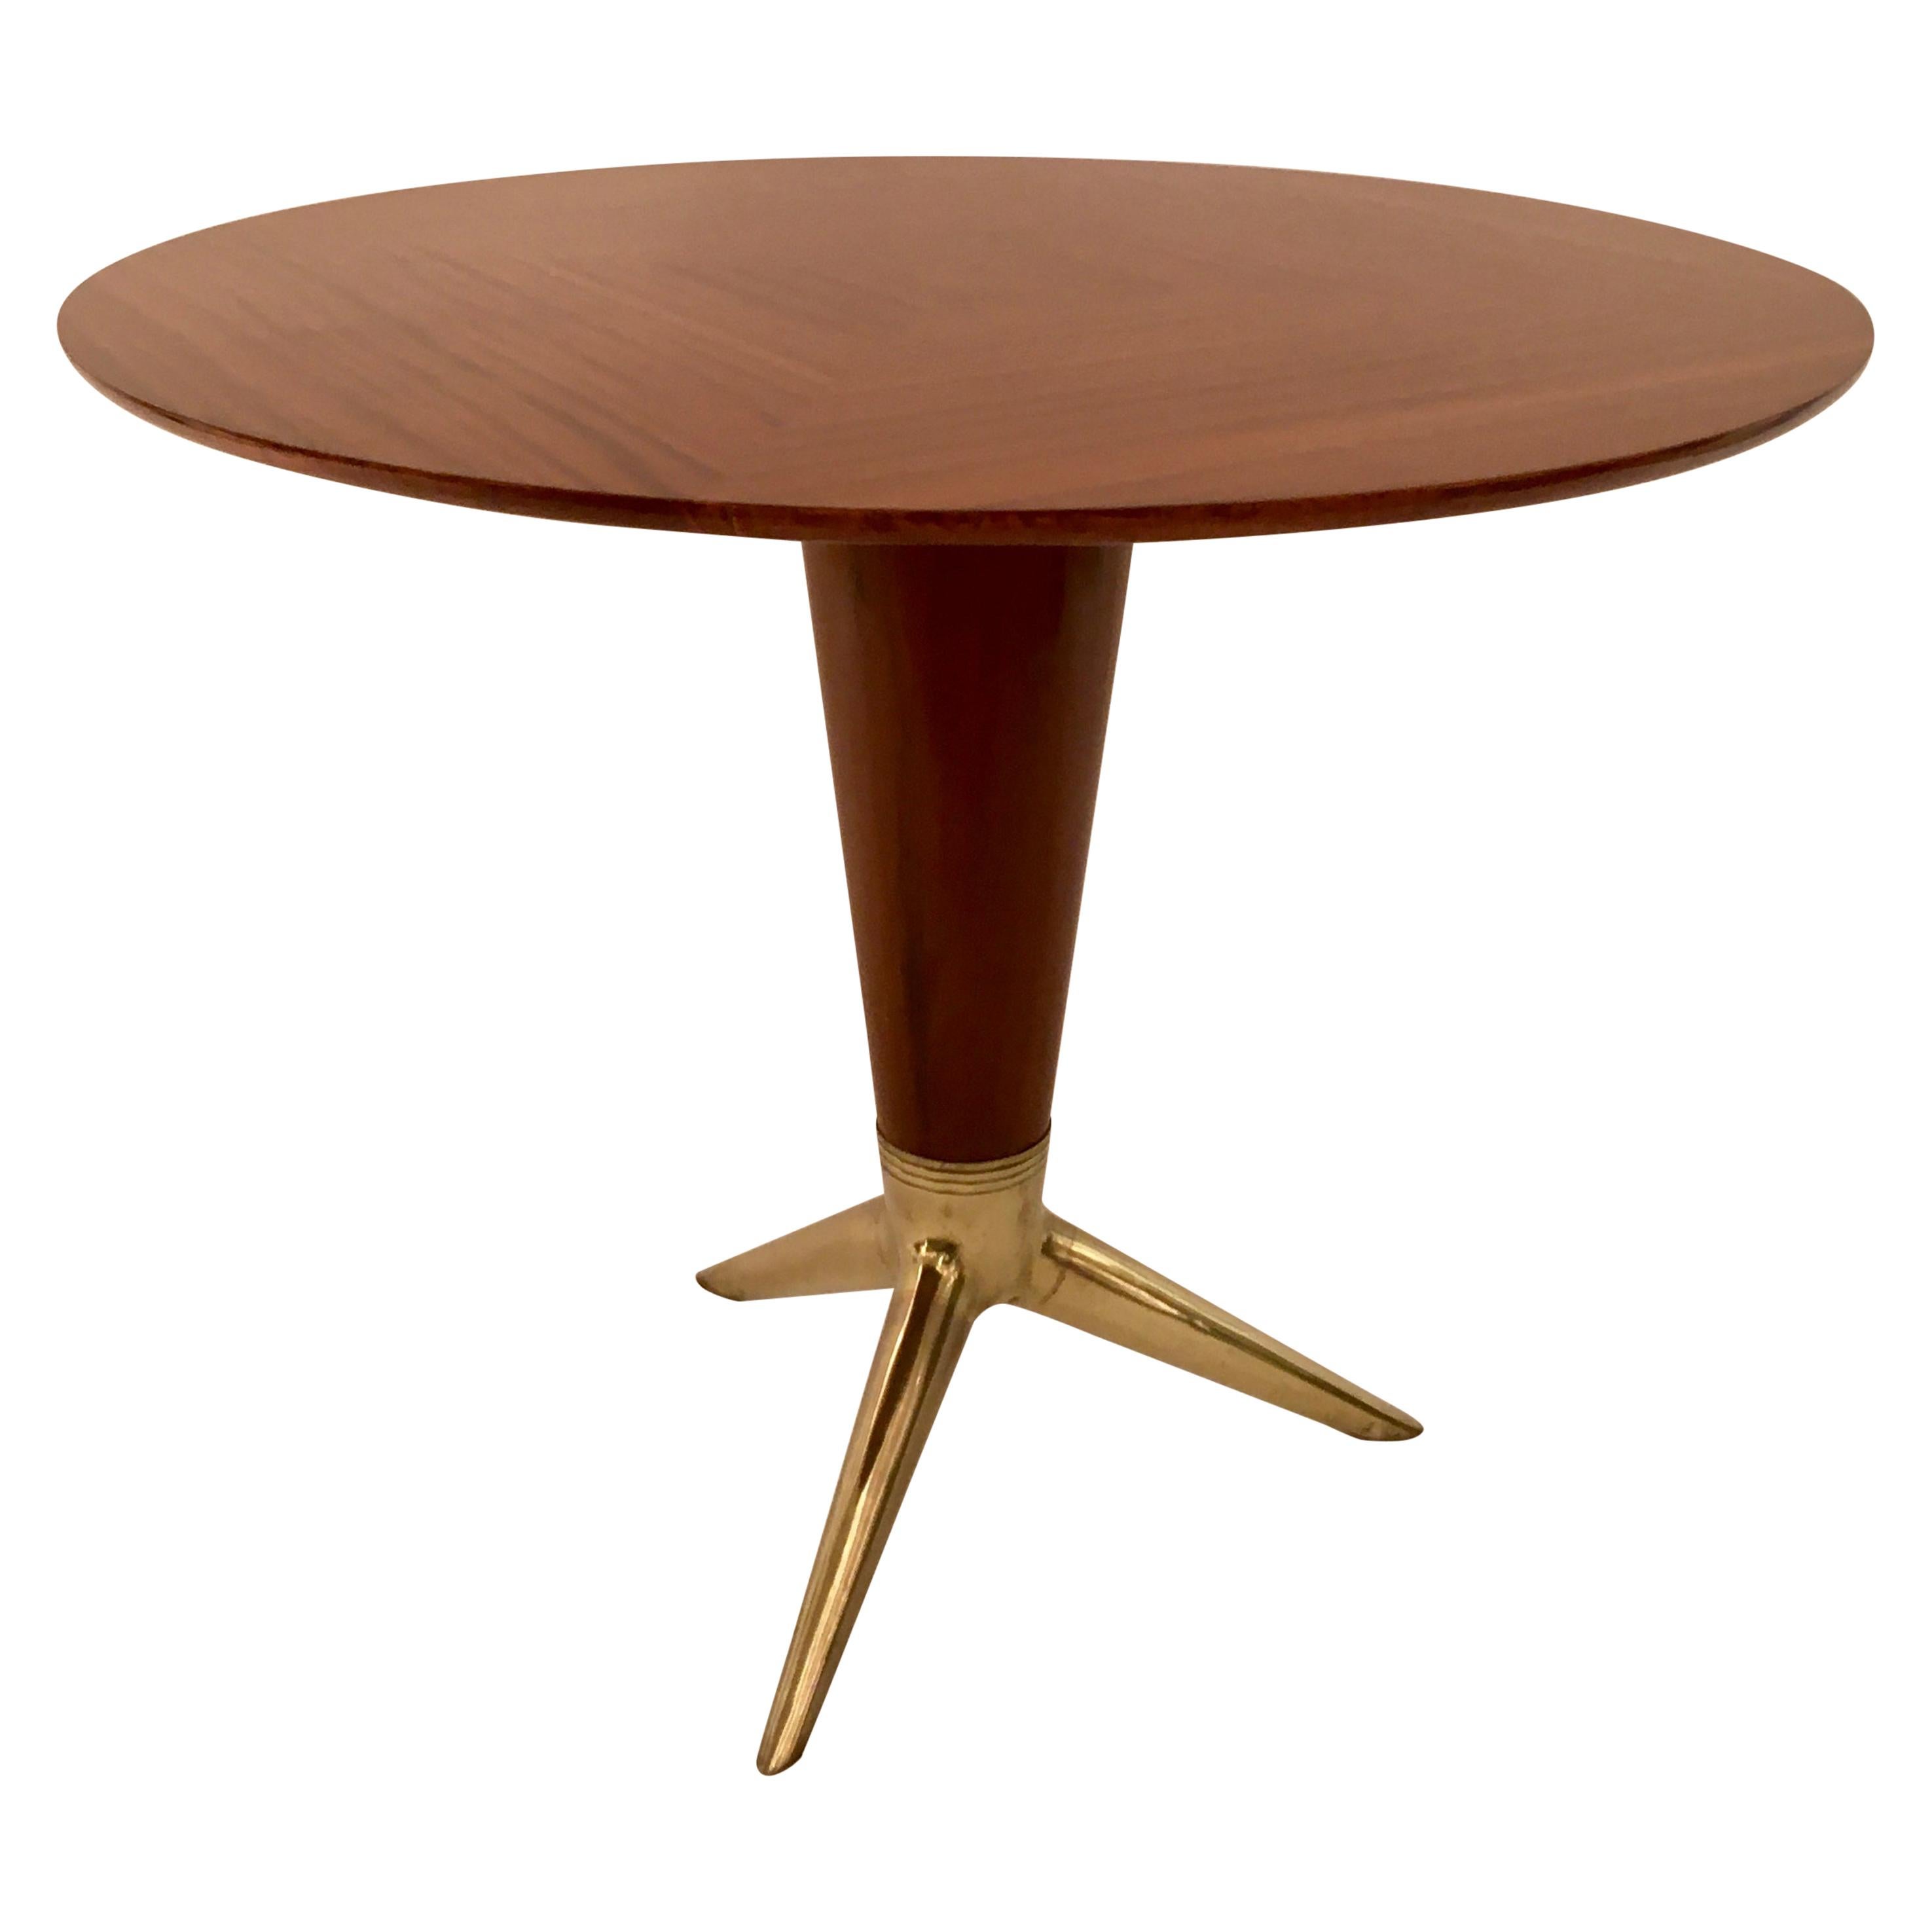 Circular Centre Table in Walnut and Brass by I.S.A. Italy, circa 1950